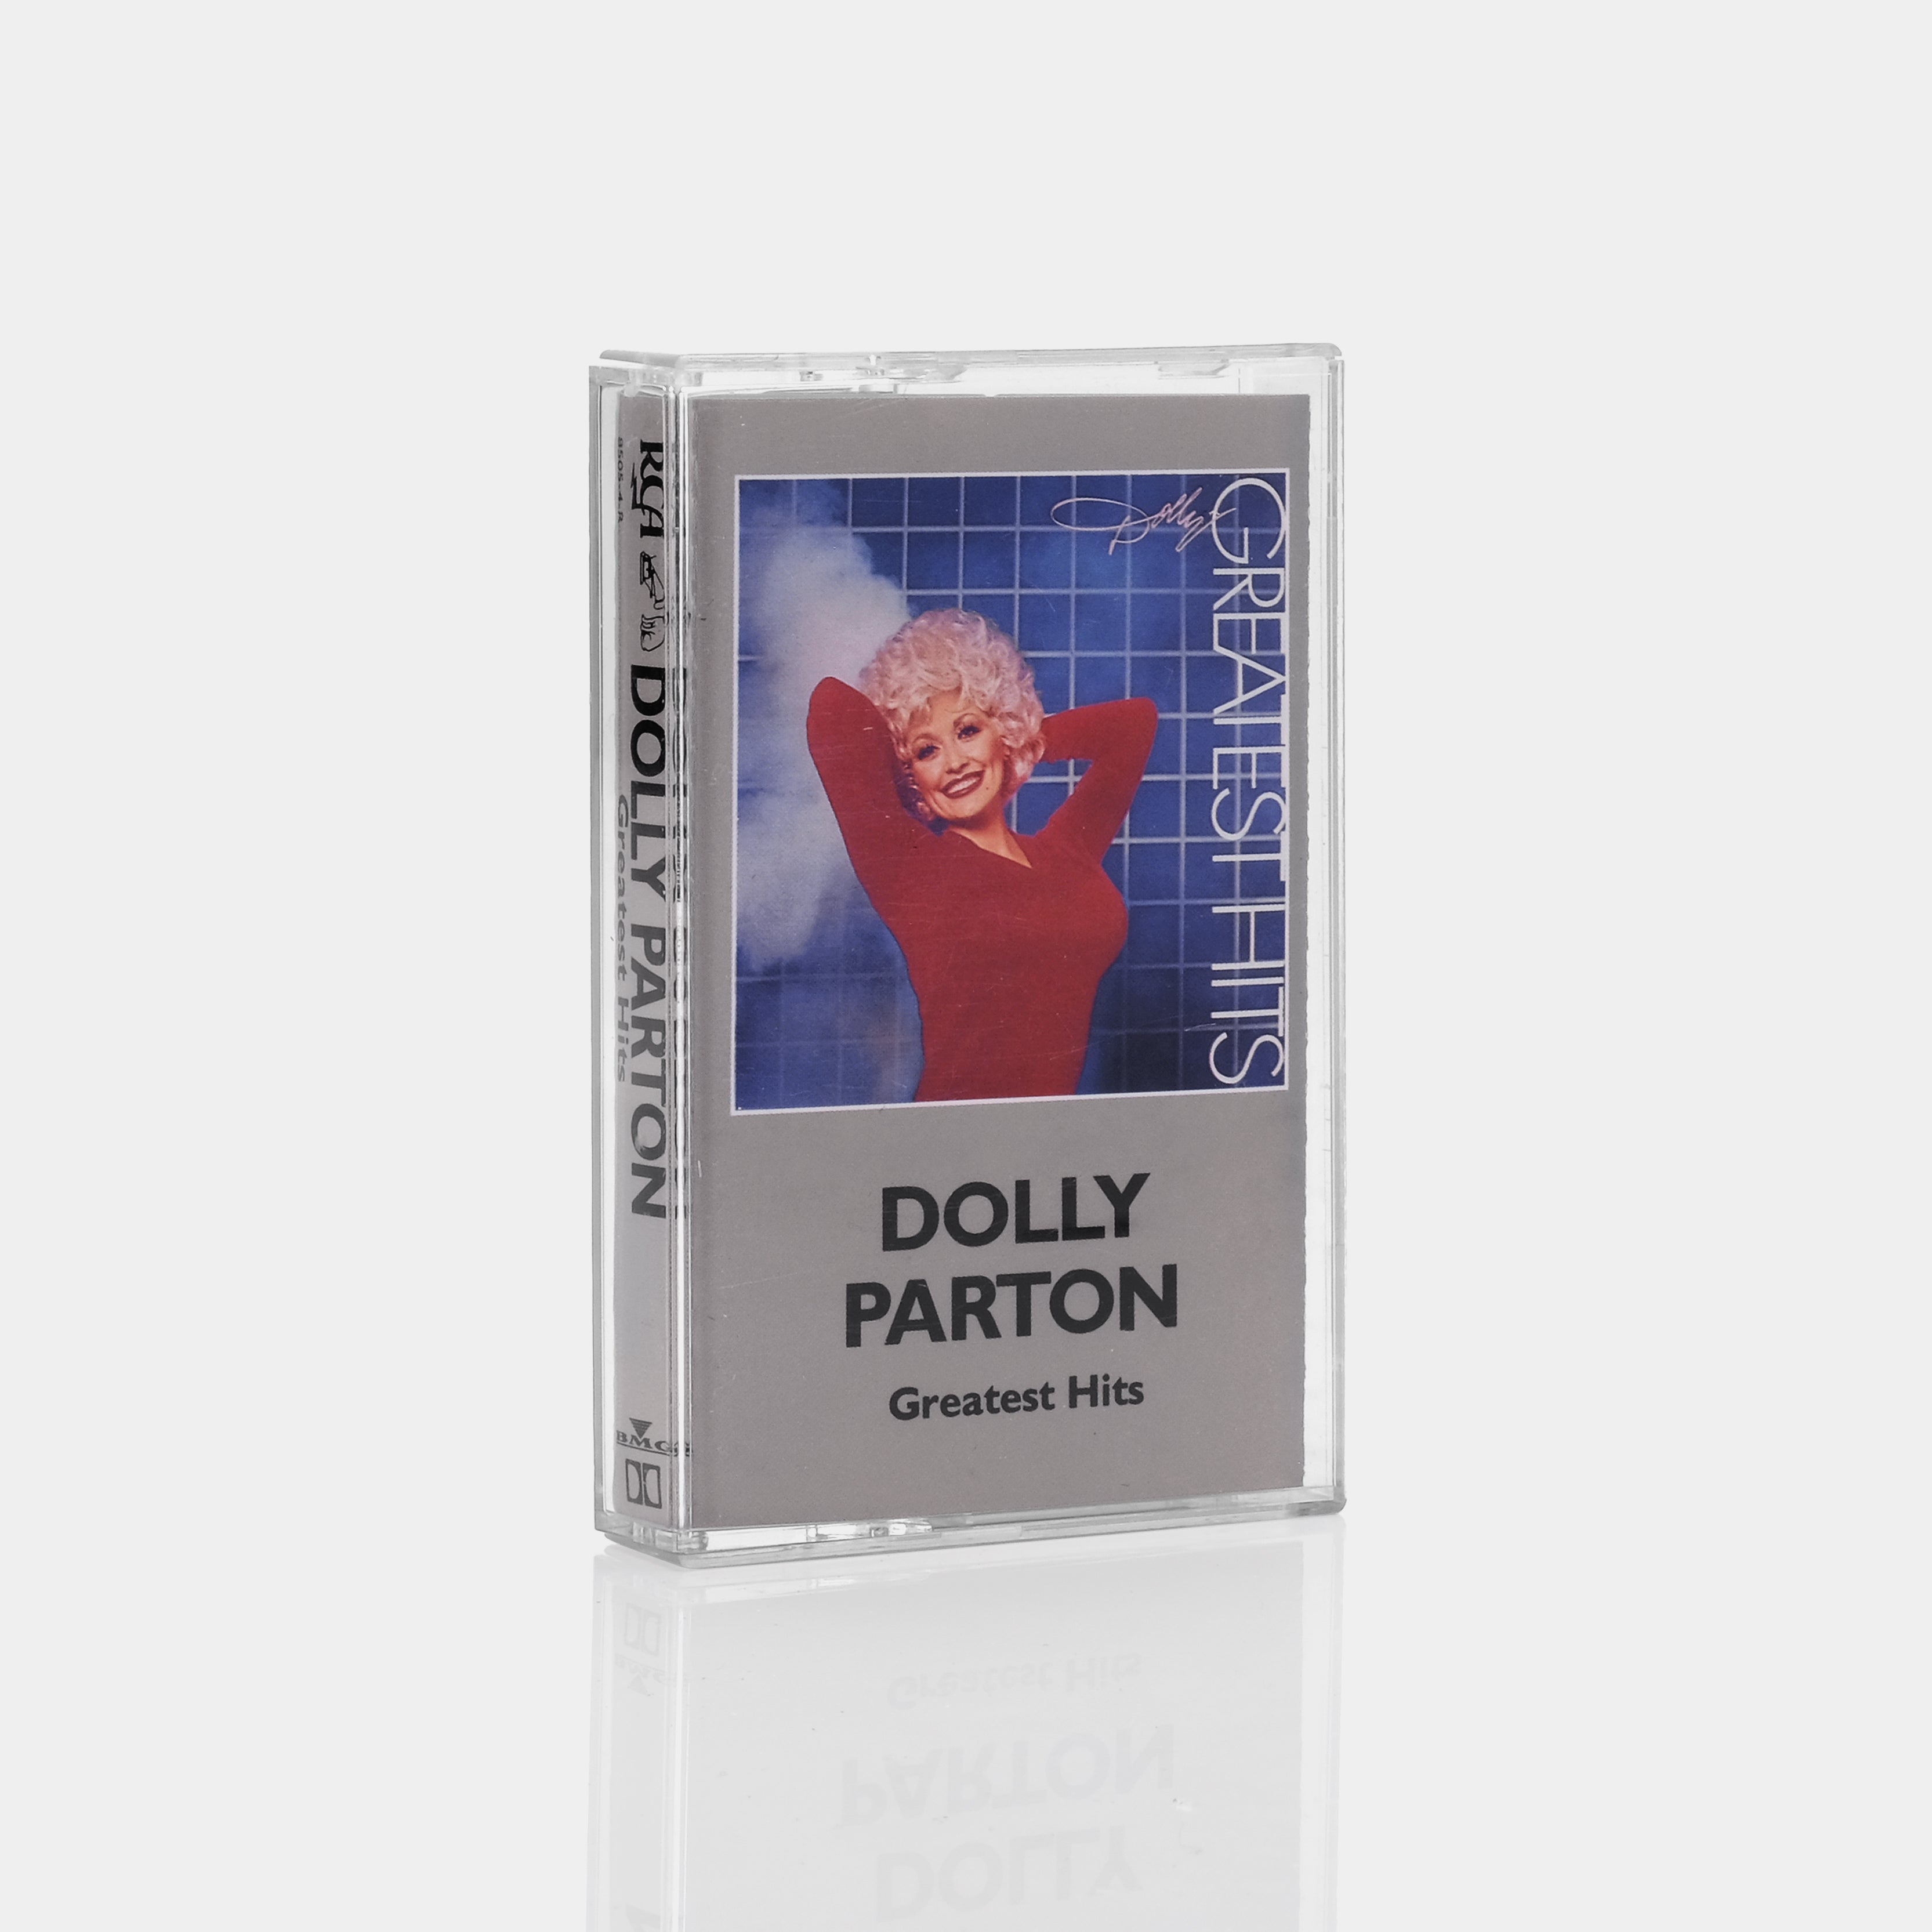 Dolly Parton - Greatest Hits Cassette Tape